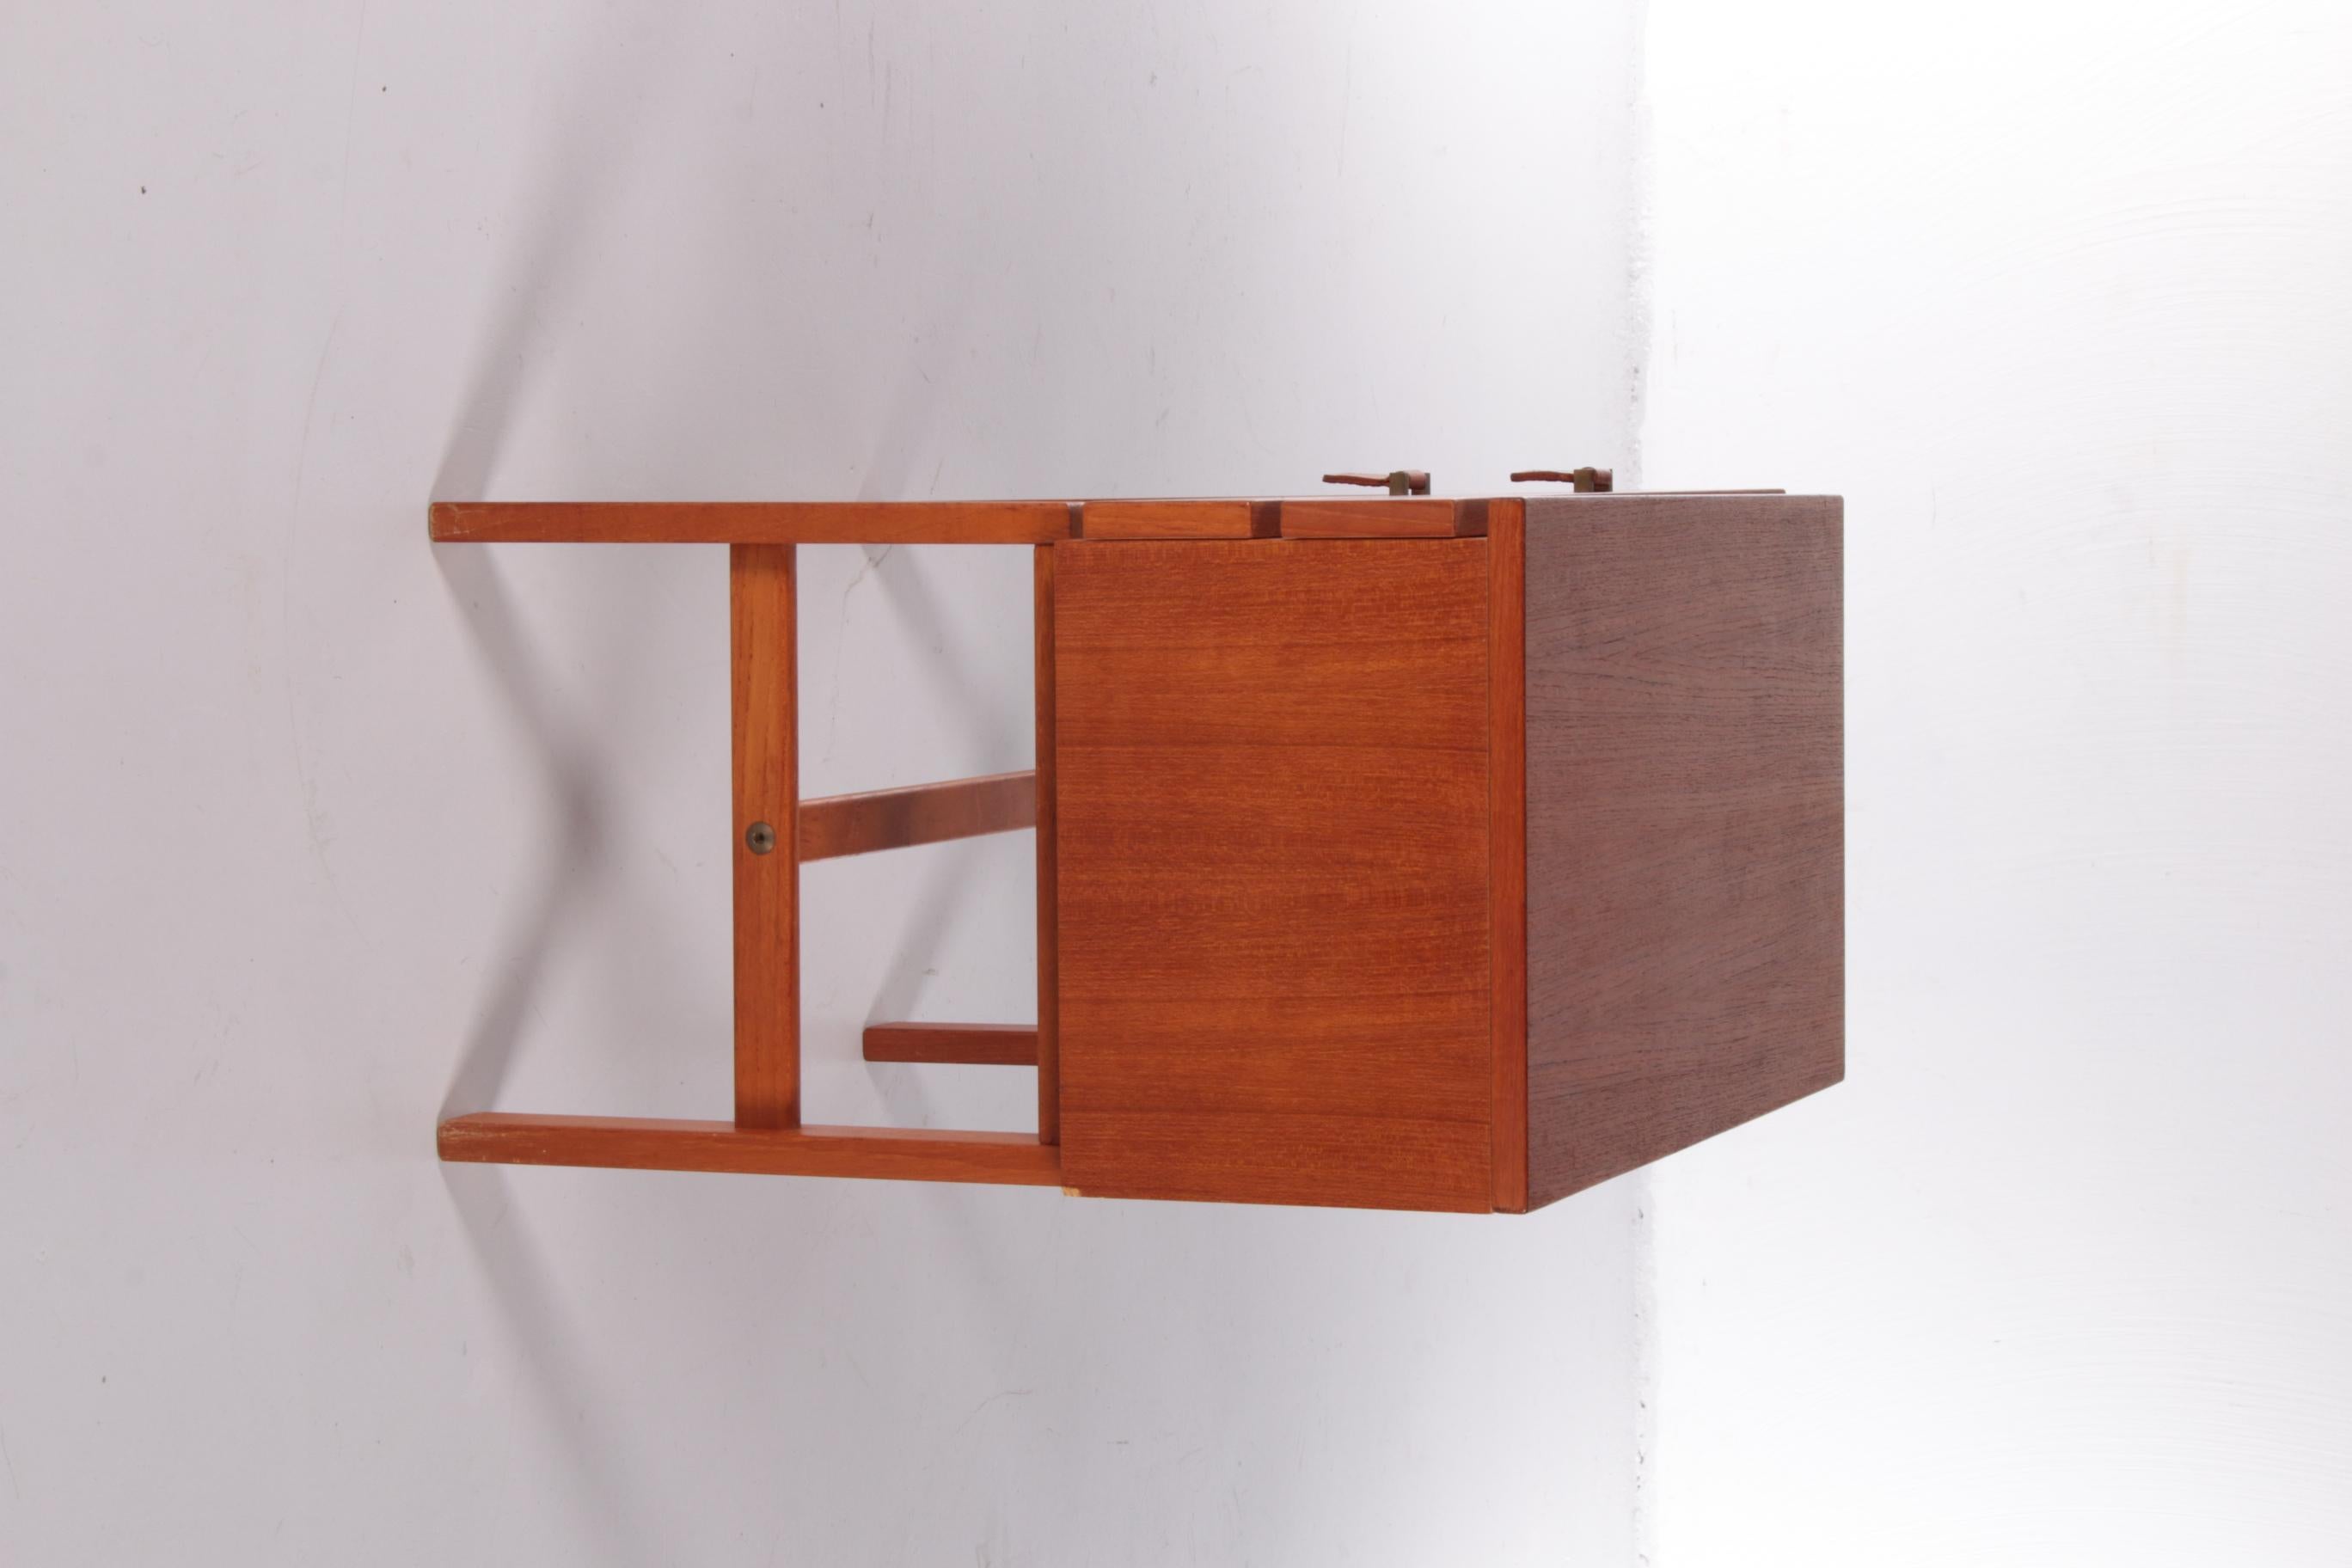 Scandinavian Modern Vintage Teak Chest of Drawers with Leather Handles by Fröseke Nybrofabrik, 1970s For Sale